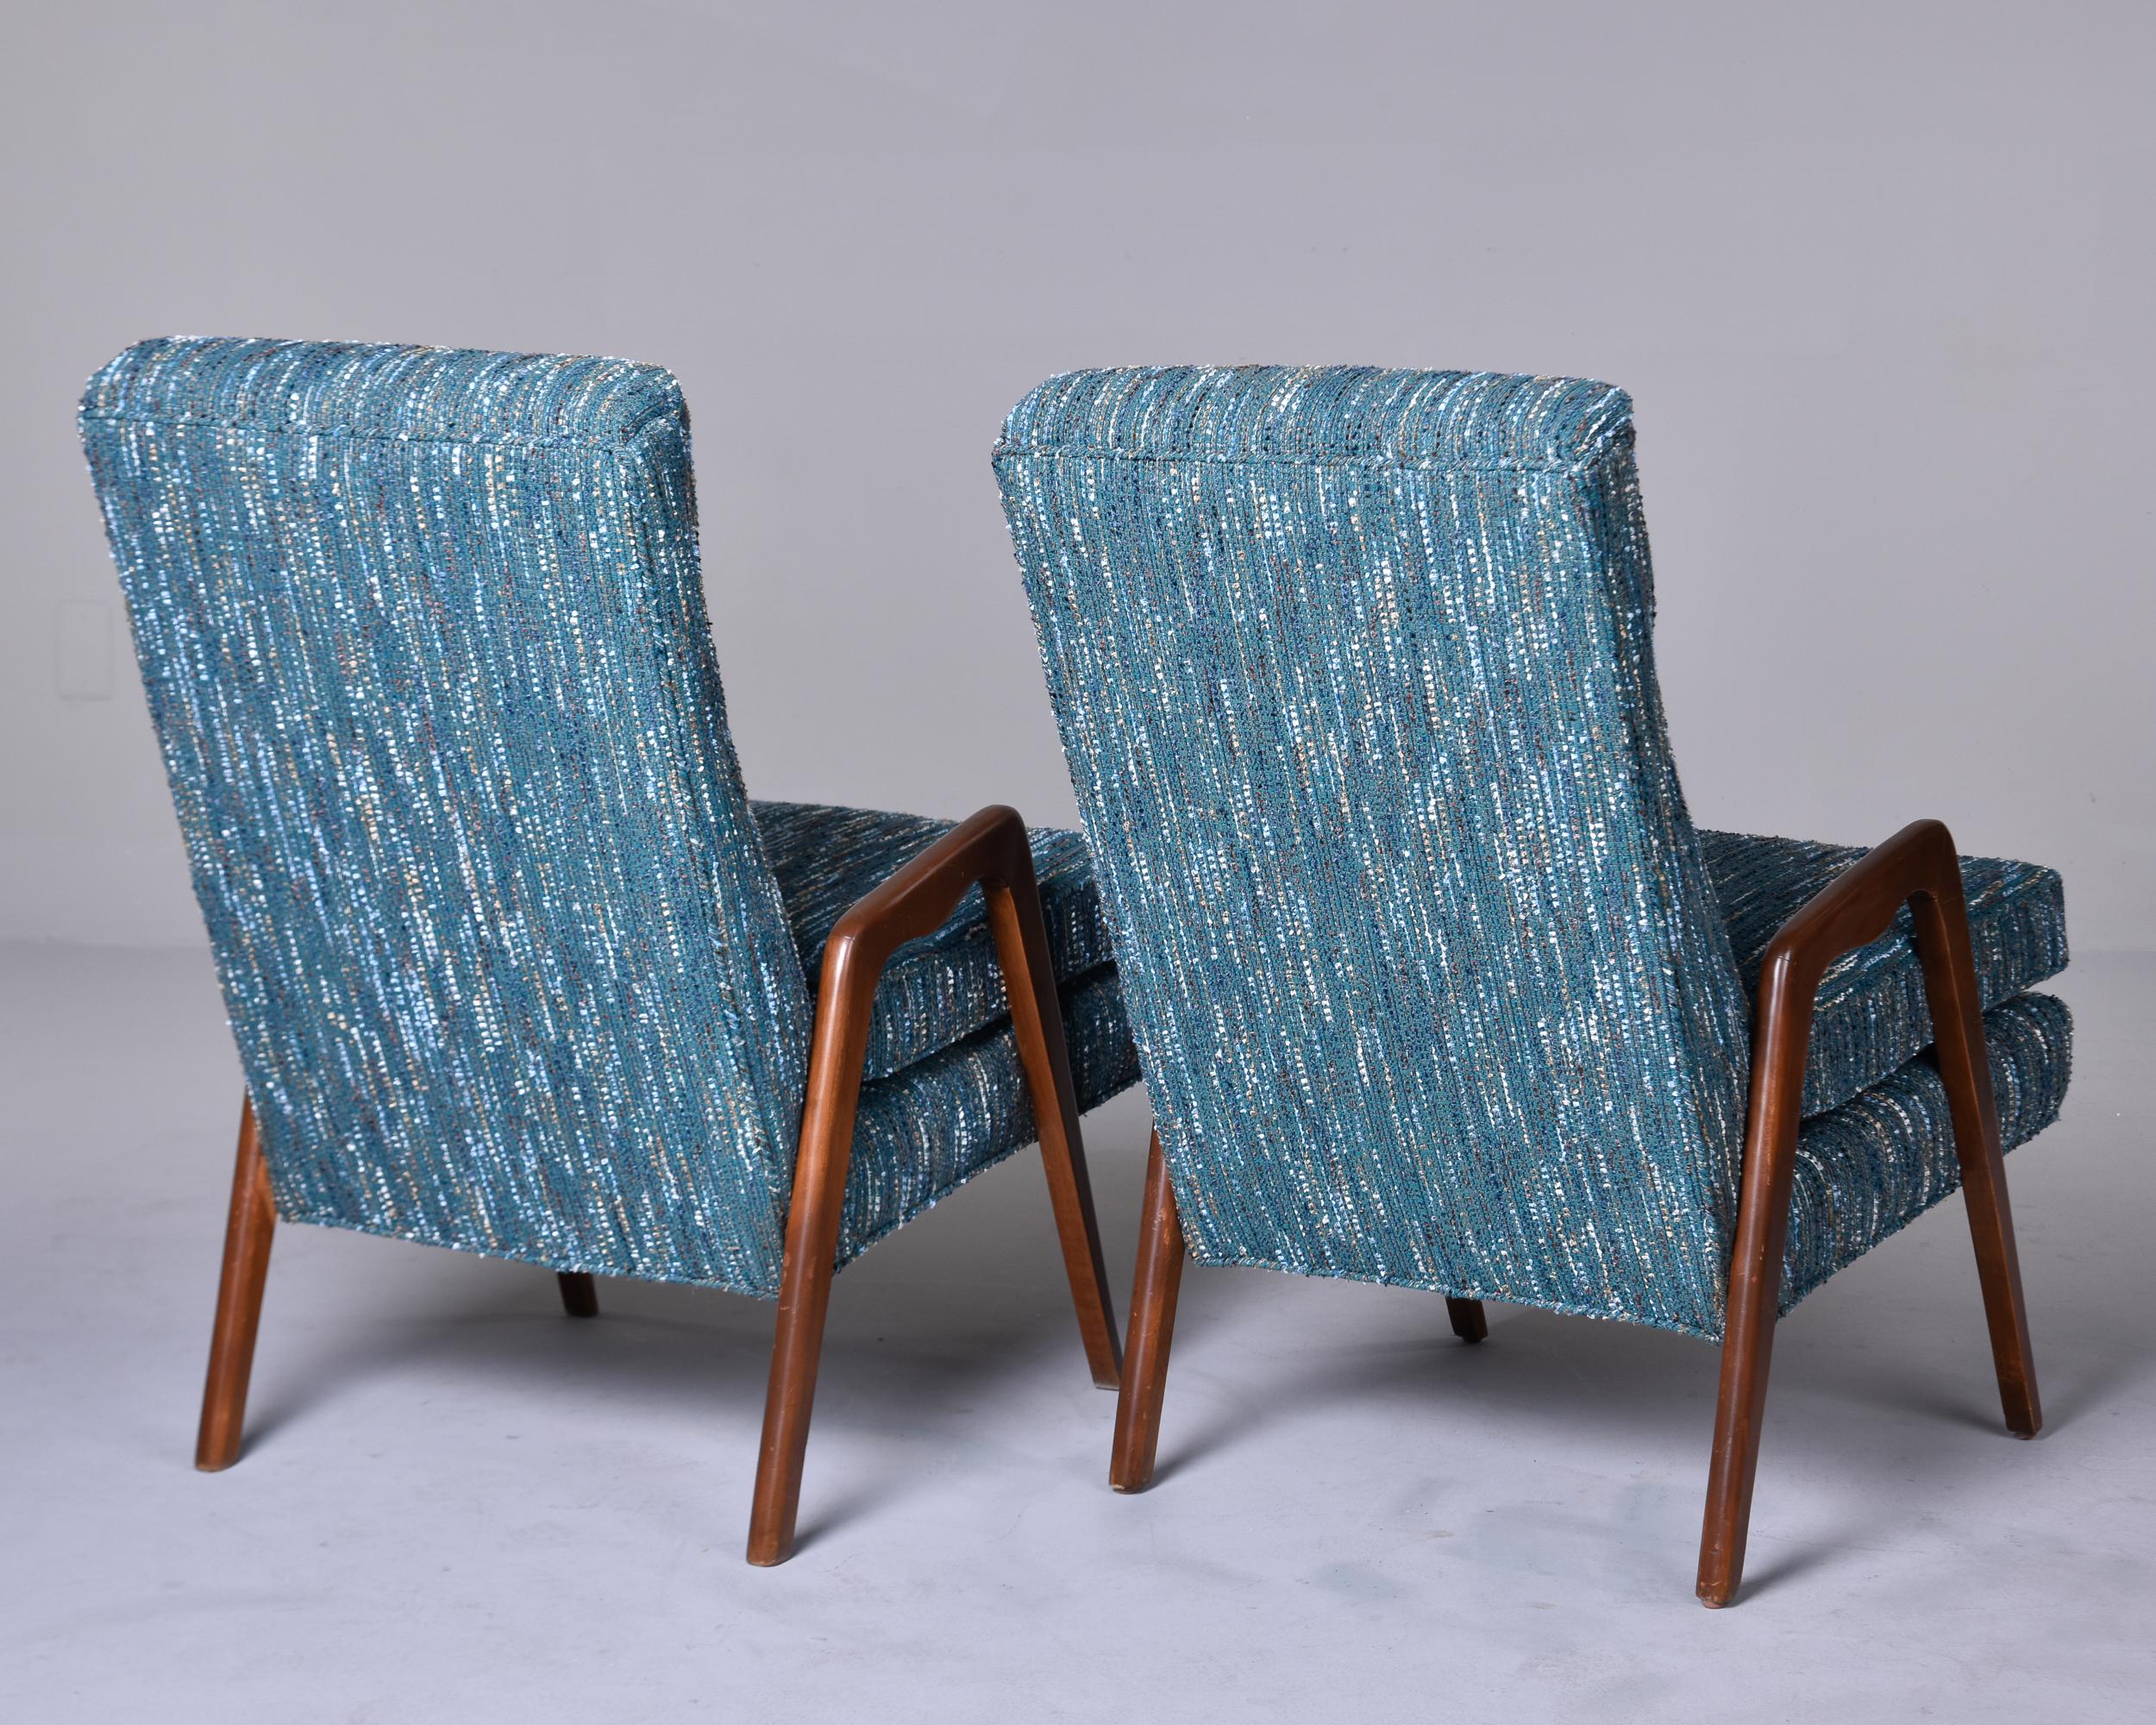 Pair of Mid-Century Italian Chairs with New Teal Tweed Upholstery For Sale 3